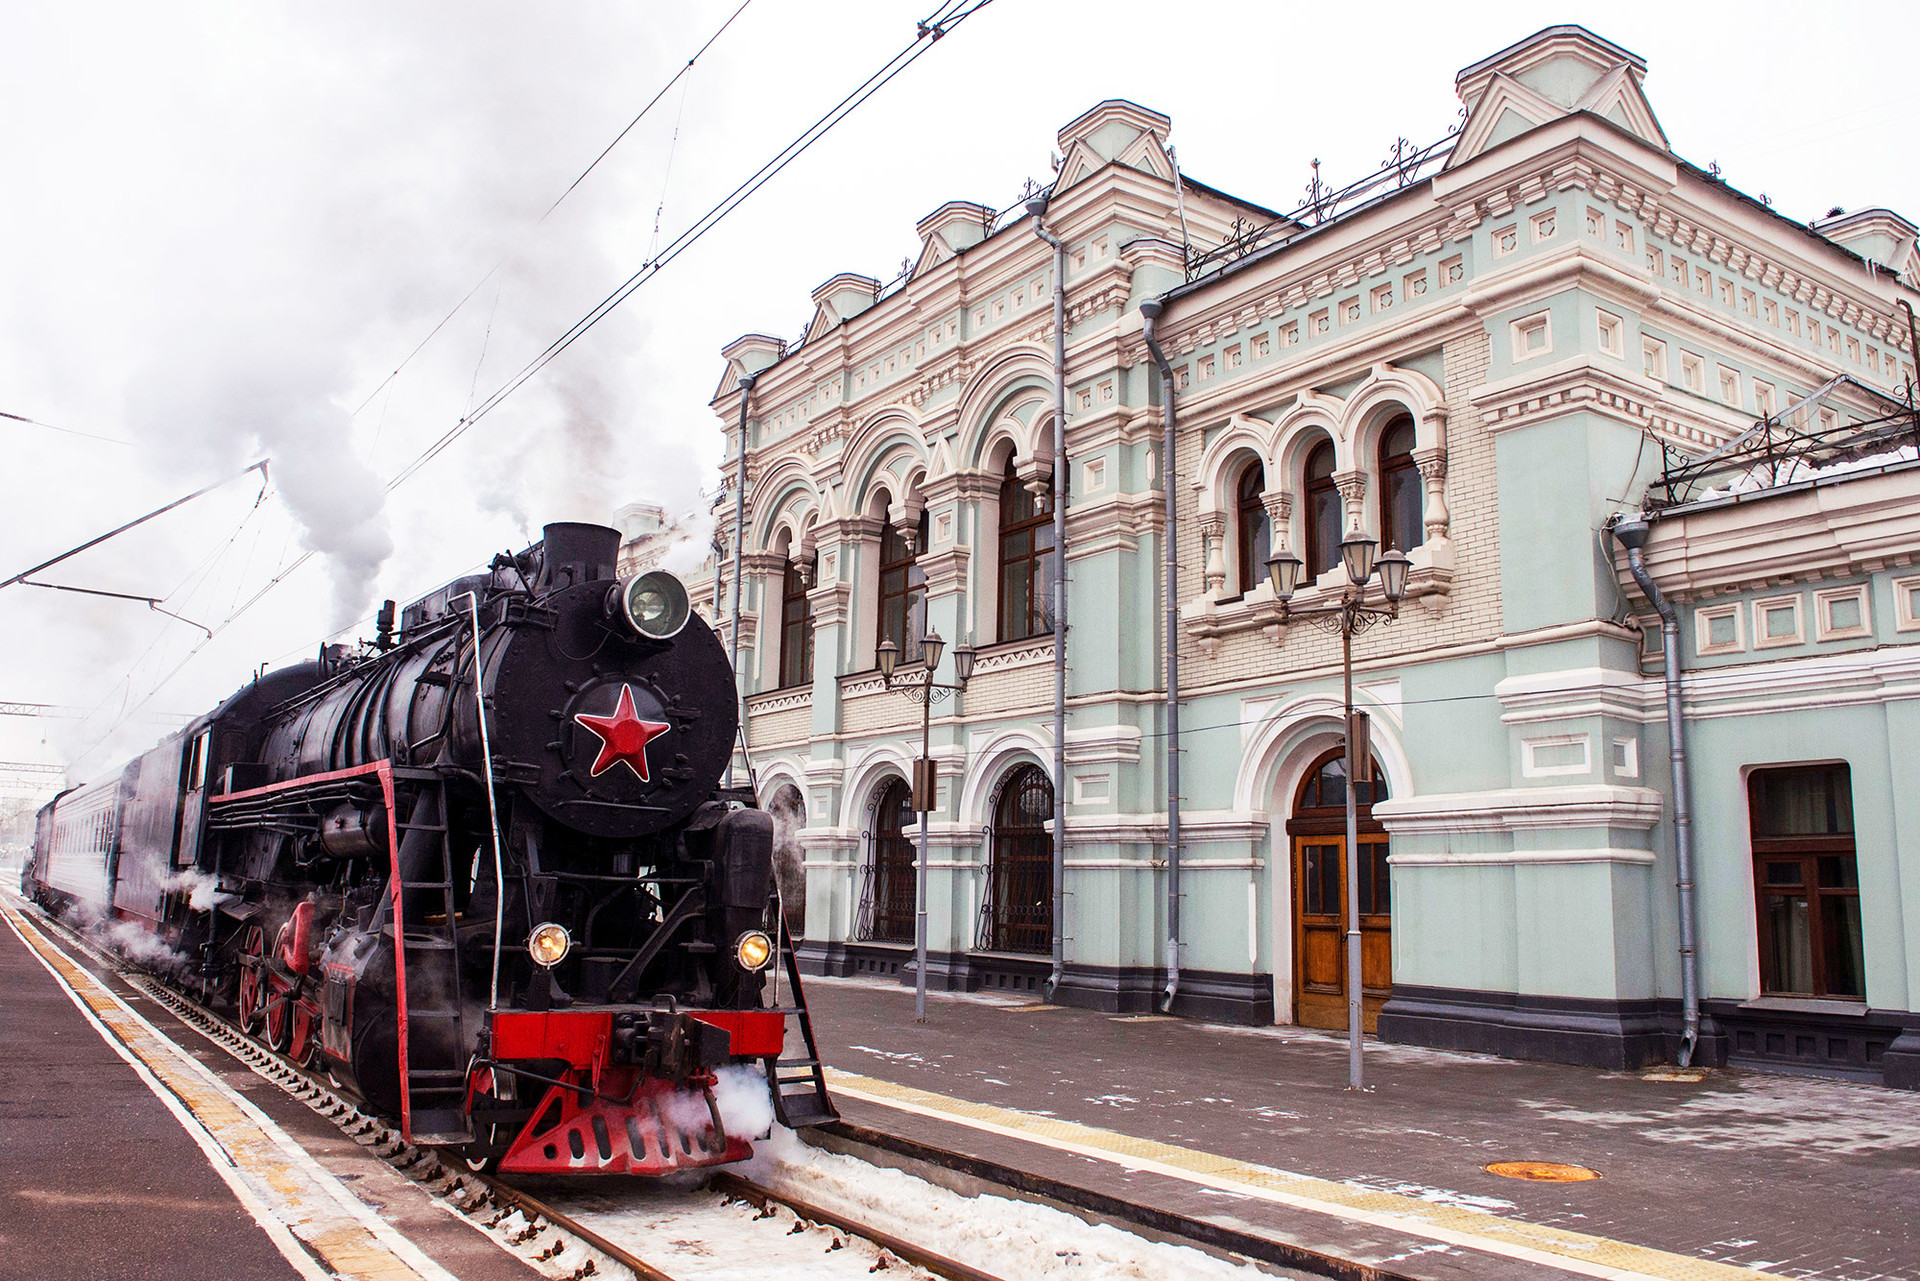 An antique train of the Russian Railways arrives at the Rizhsky railway station.